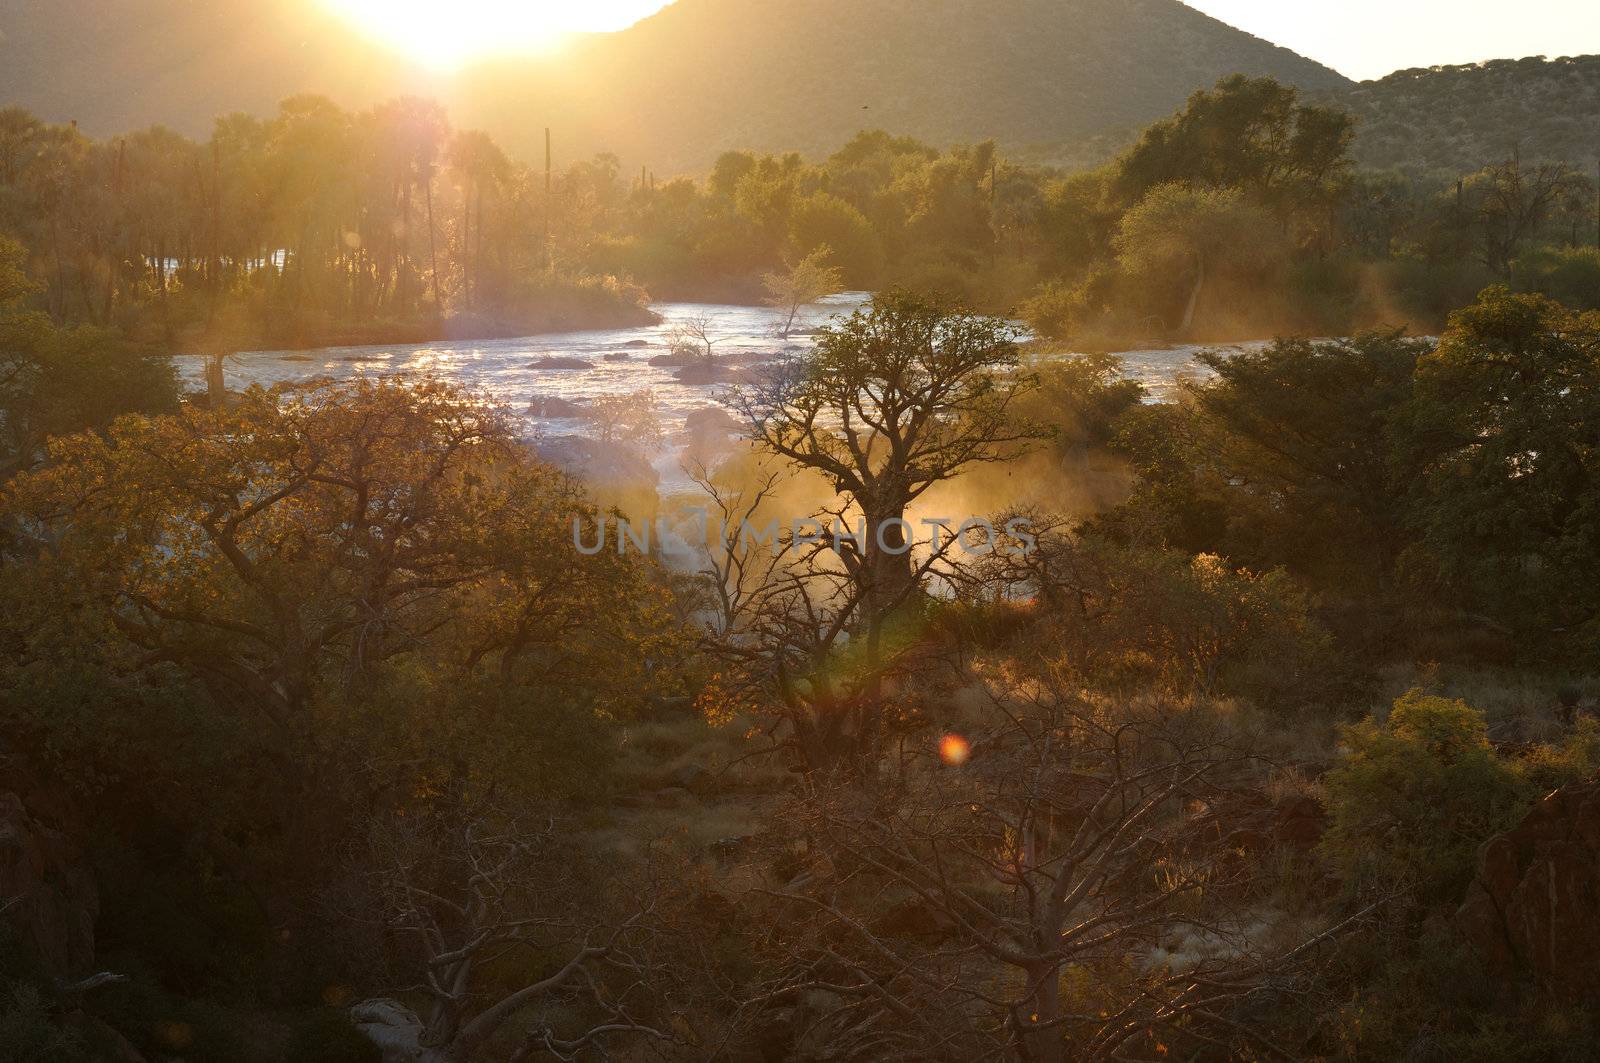 A small portion of the Epupa waterfalls, Namibia at sunrise